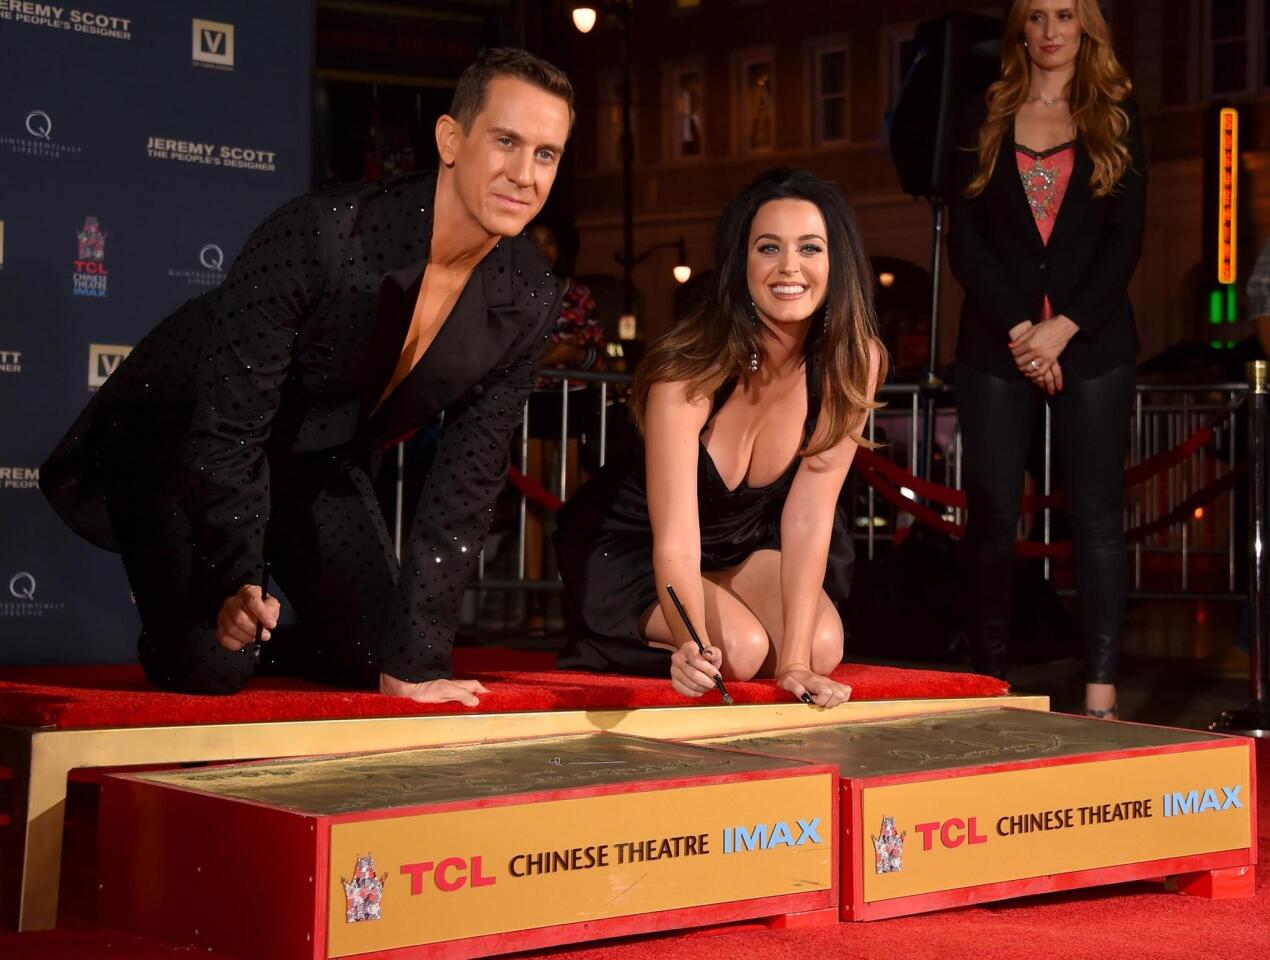 Jeremy Scott, Katy Perry make an impression at TCL Grauman's Chinese Theatre